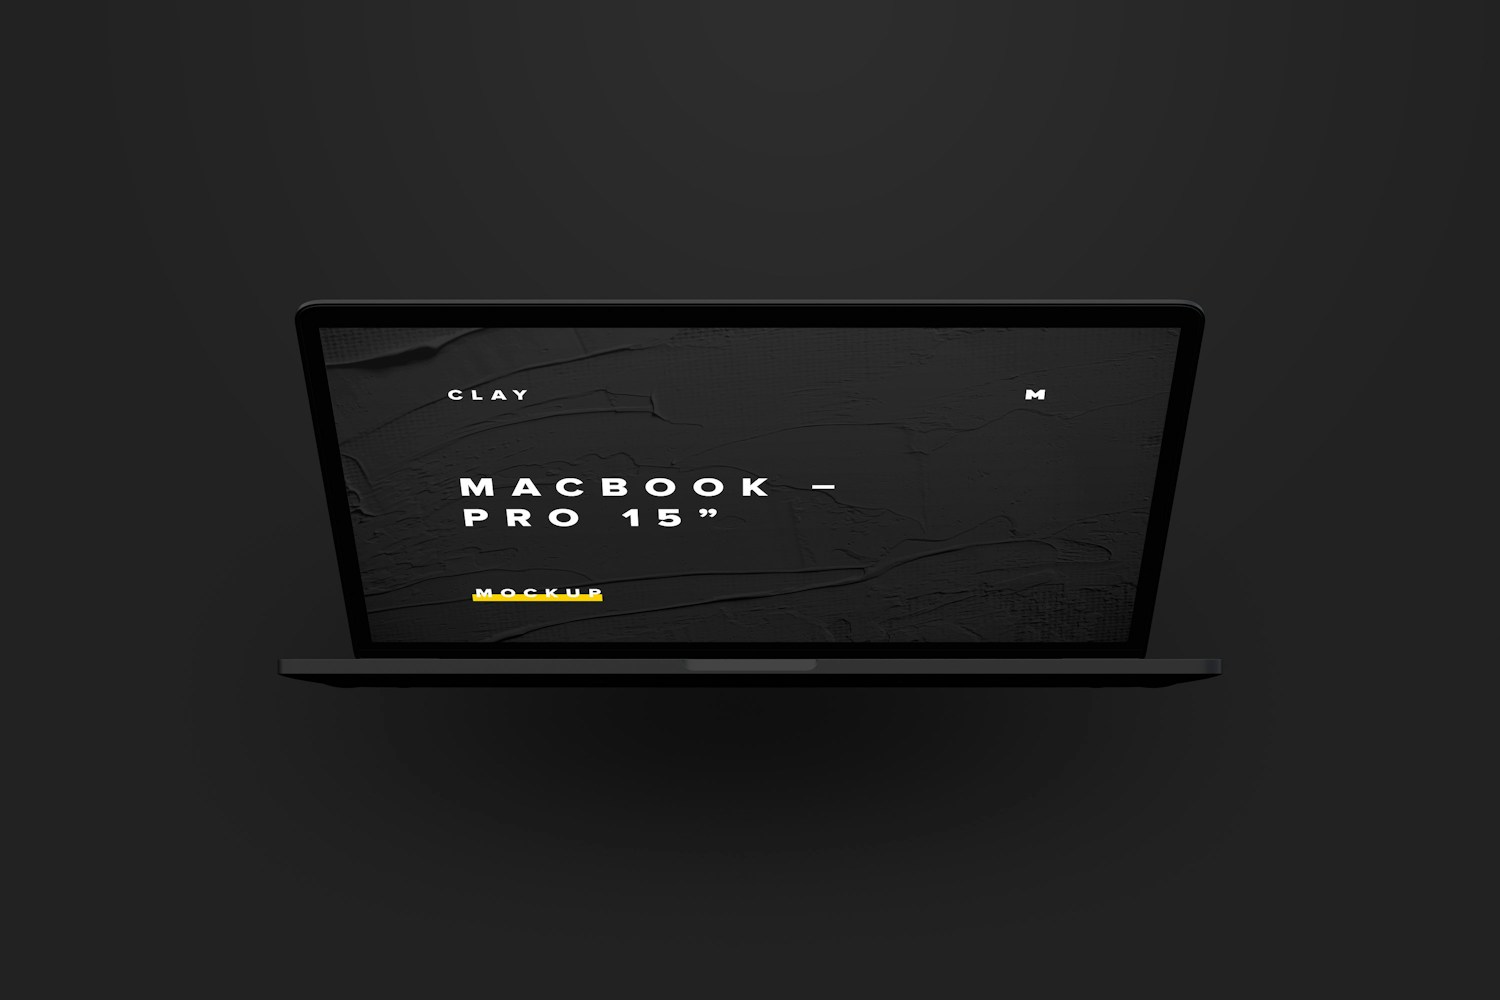 Clay MacBook Pro 15" with Touch Bar, Front View Mockup 02